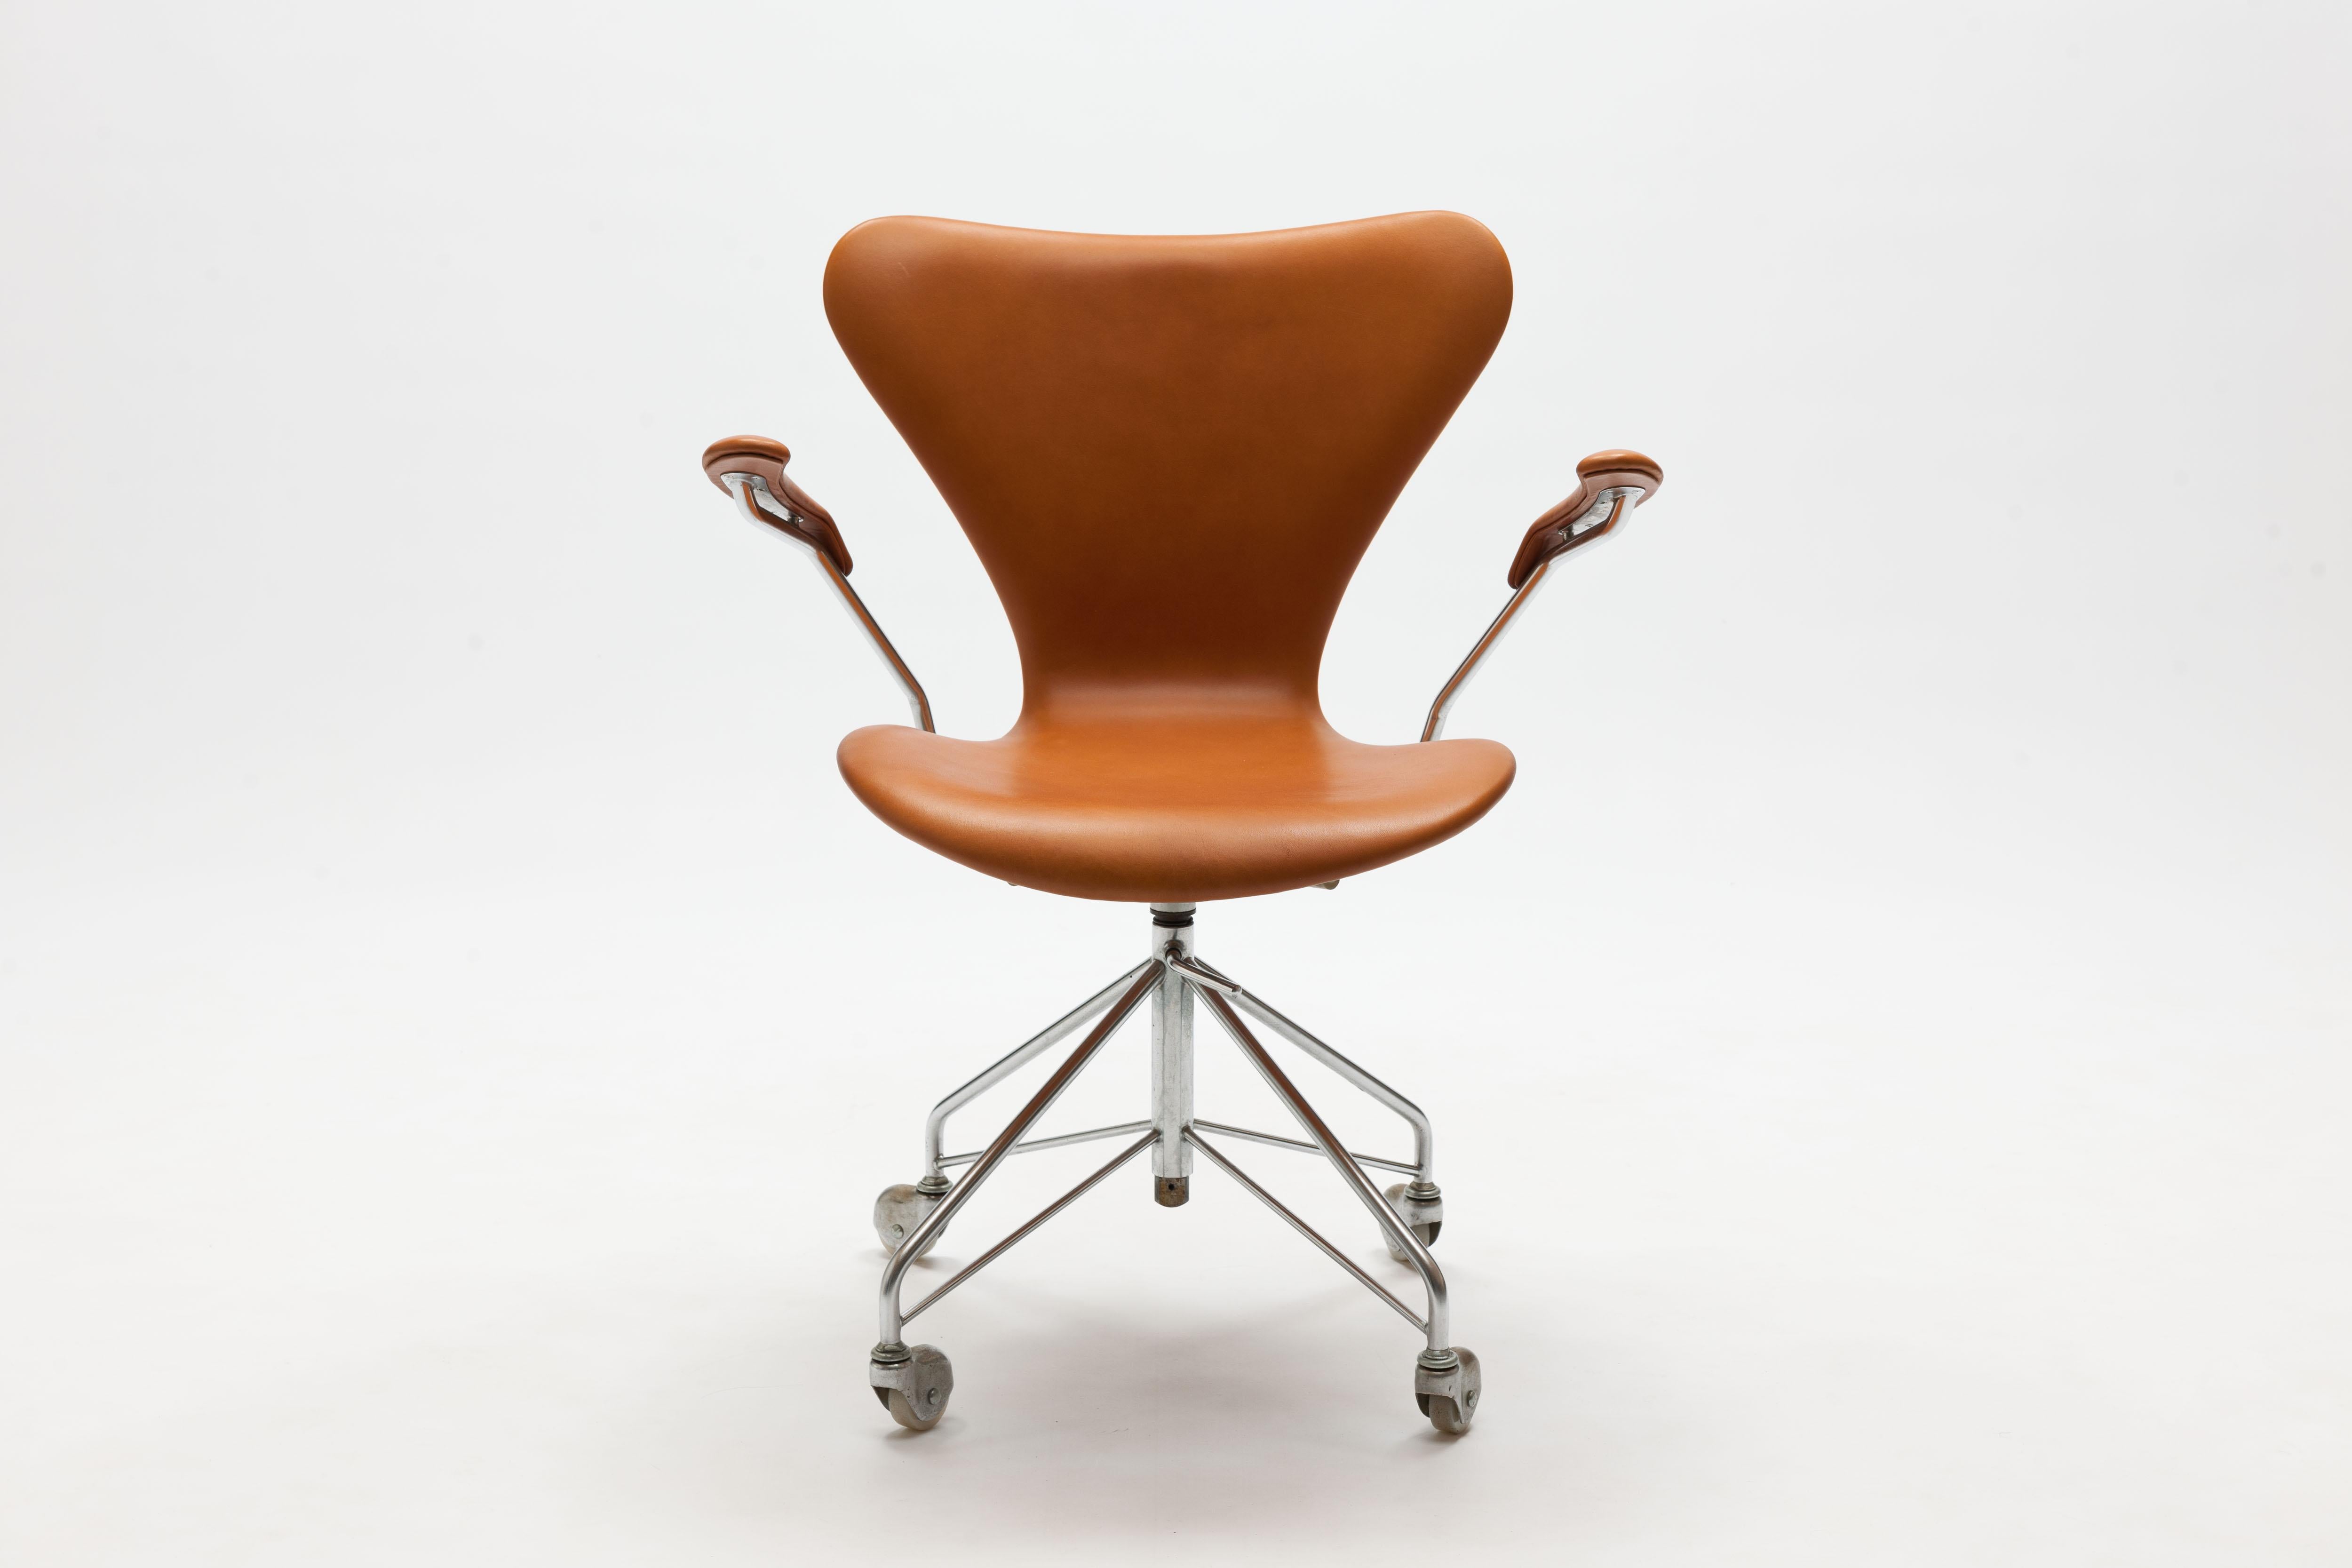 Arne Jacobsen swivel desk chair model 3217 office chair with armrests. Original four-star swivel base with chromed steel feet on casters. Designed by Arne Jacobsen in 1955.
This chair dates from the early 1960's produced by Fritz Hansen.
Chair